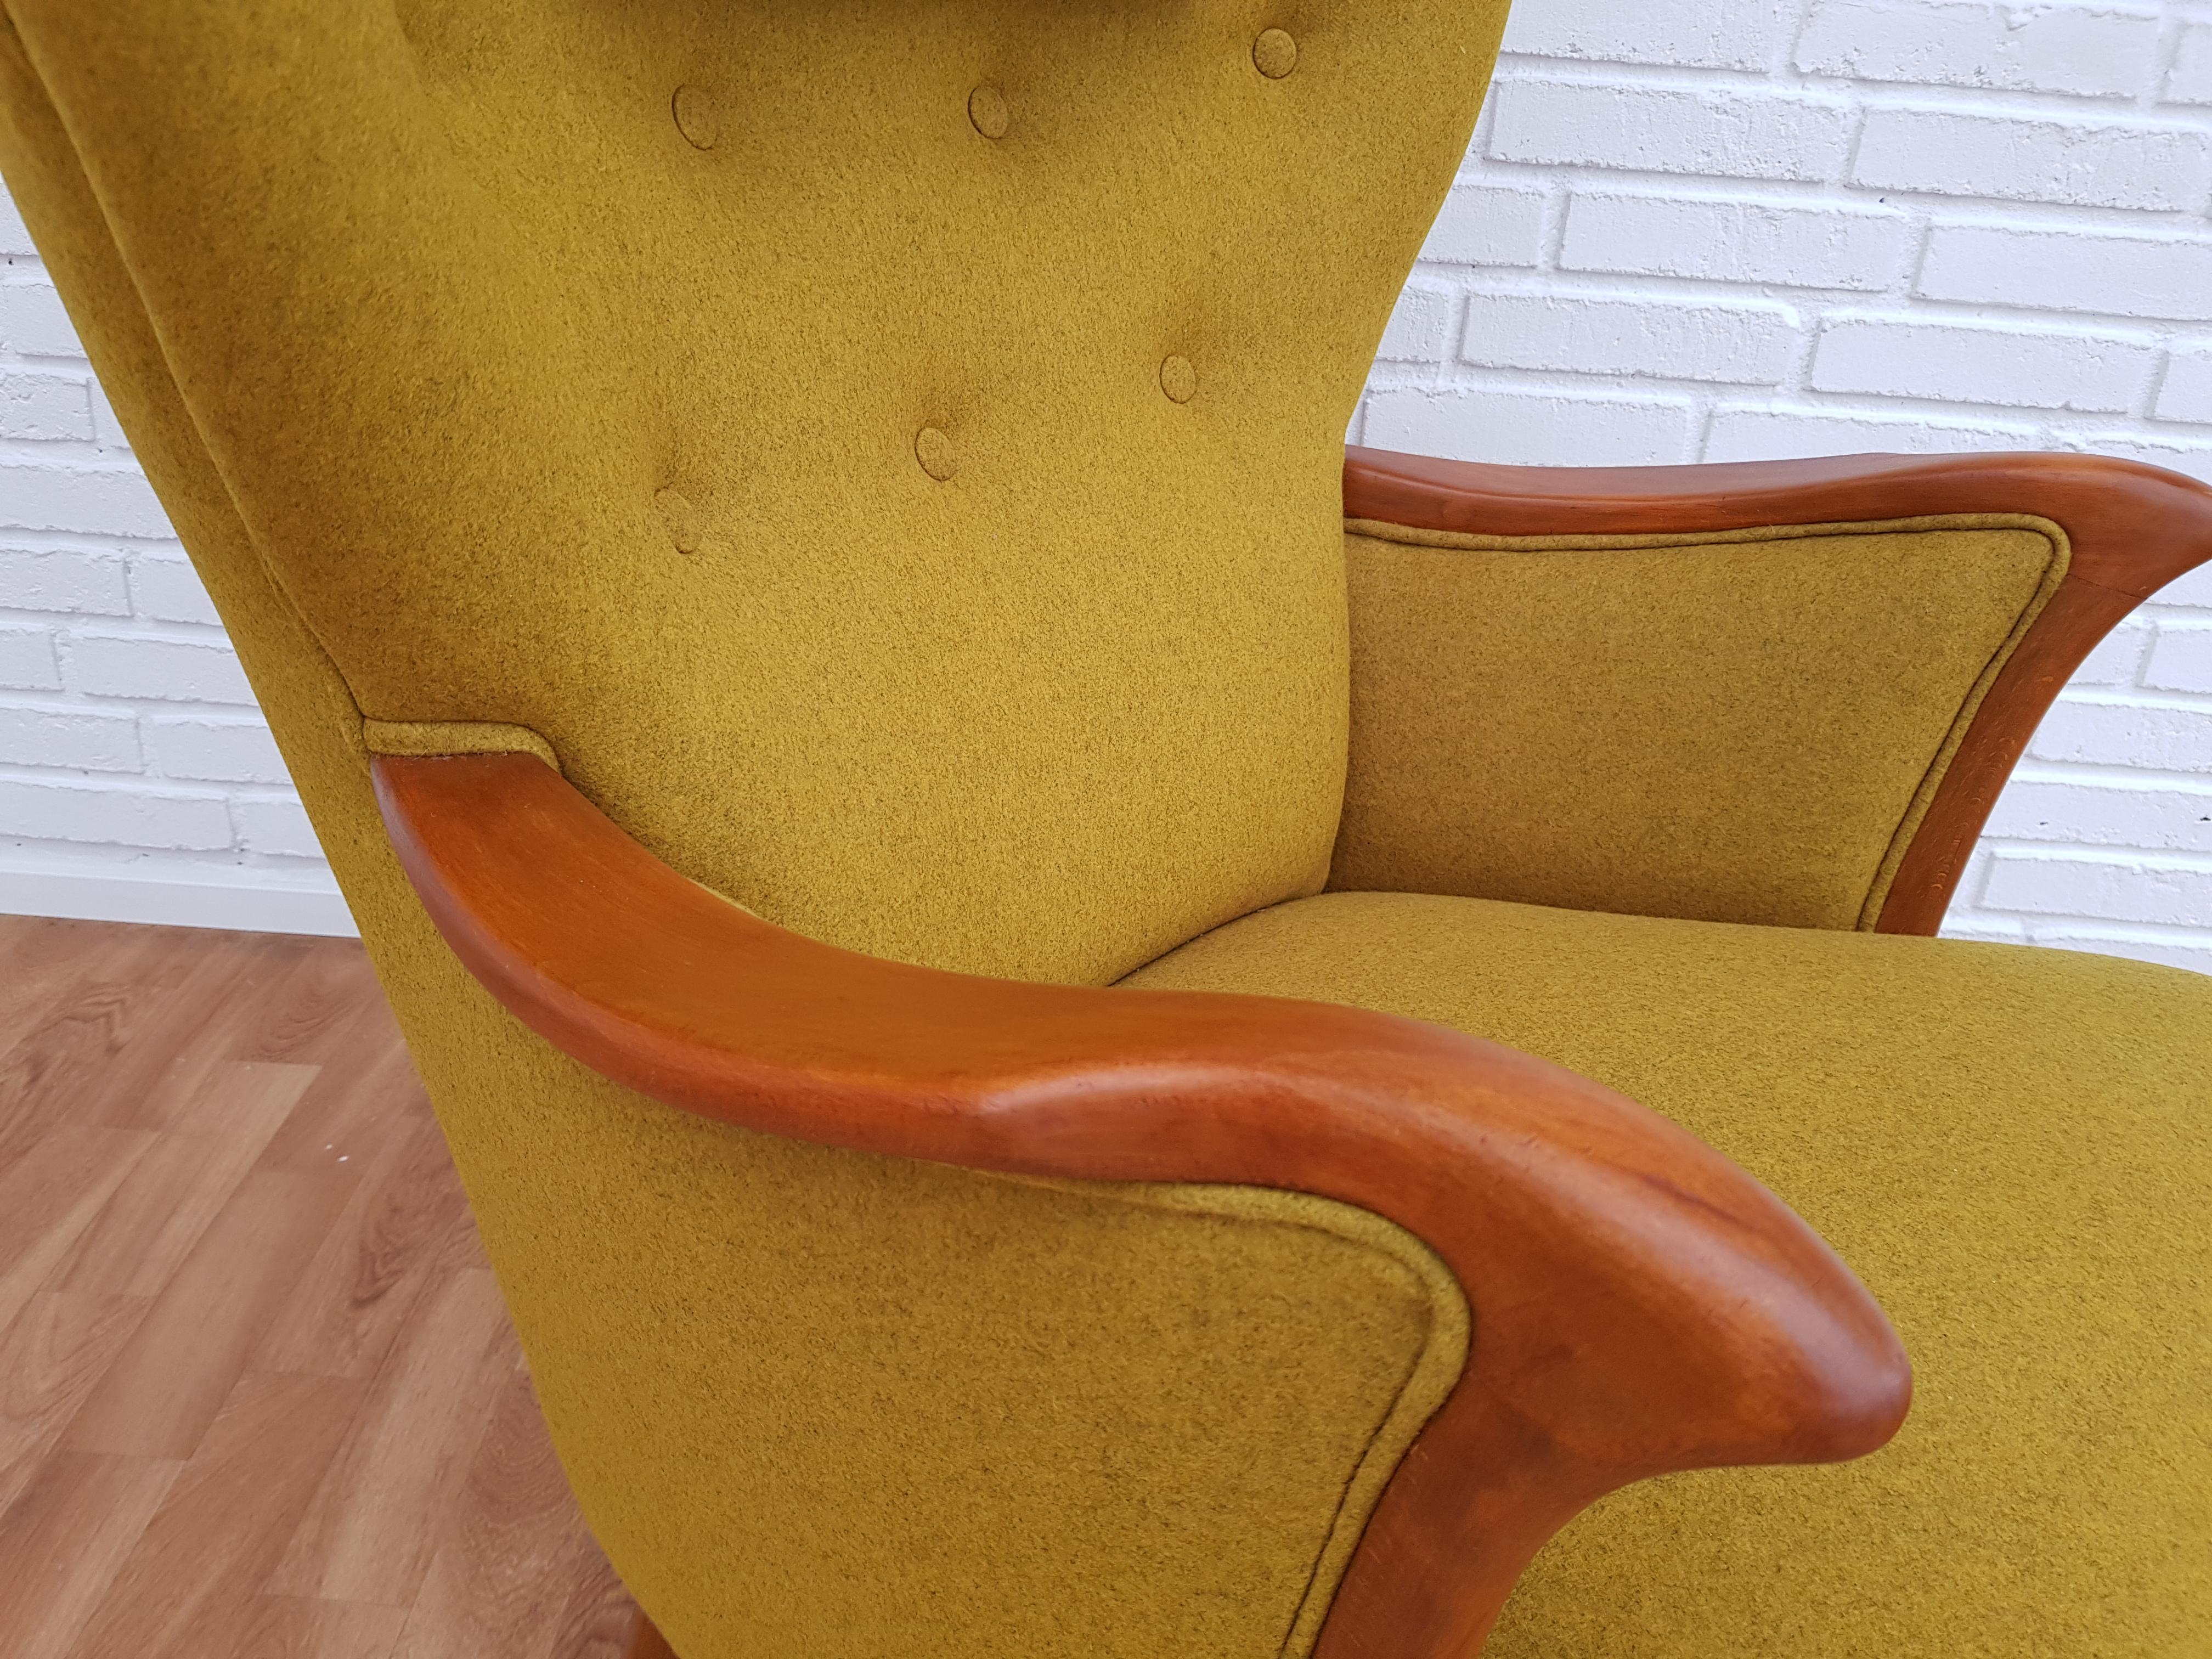 A nice Danish design reading chair, wool fabric, ottoman, neck pillow. Danish furniture manufacturer. Produced in circa 1960s. New reupholstered in quality curry-yellow wool fabric. Completely renovated (new foam, felt, cotton) by professional